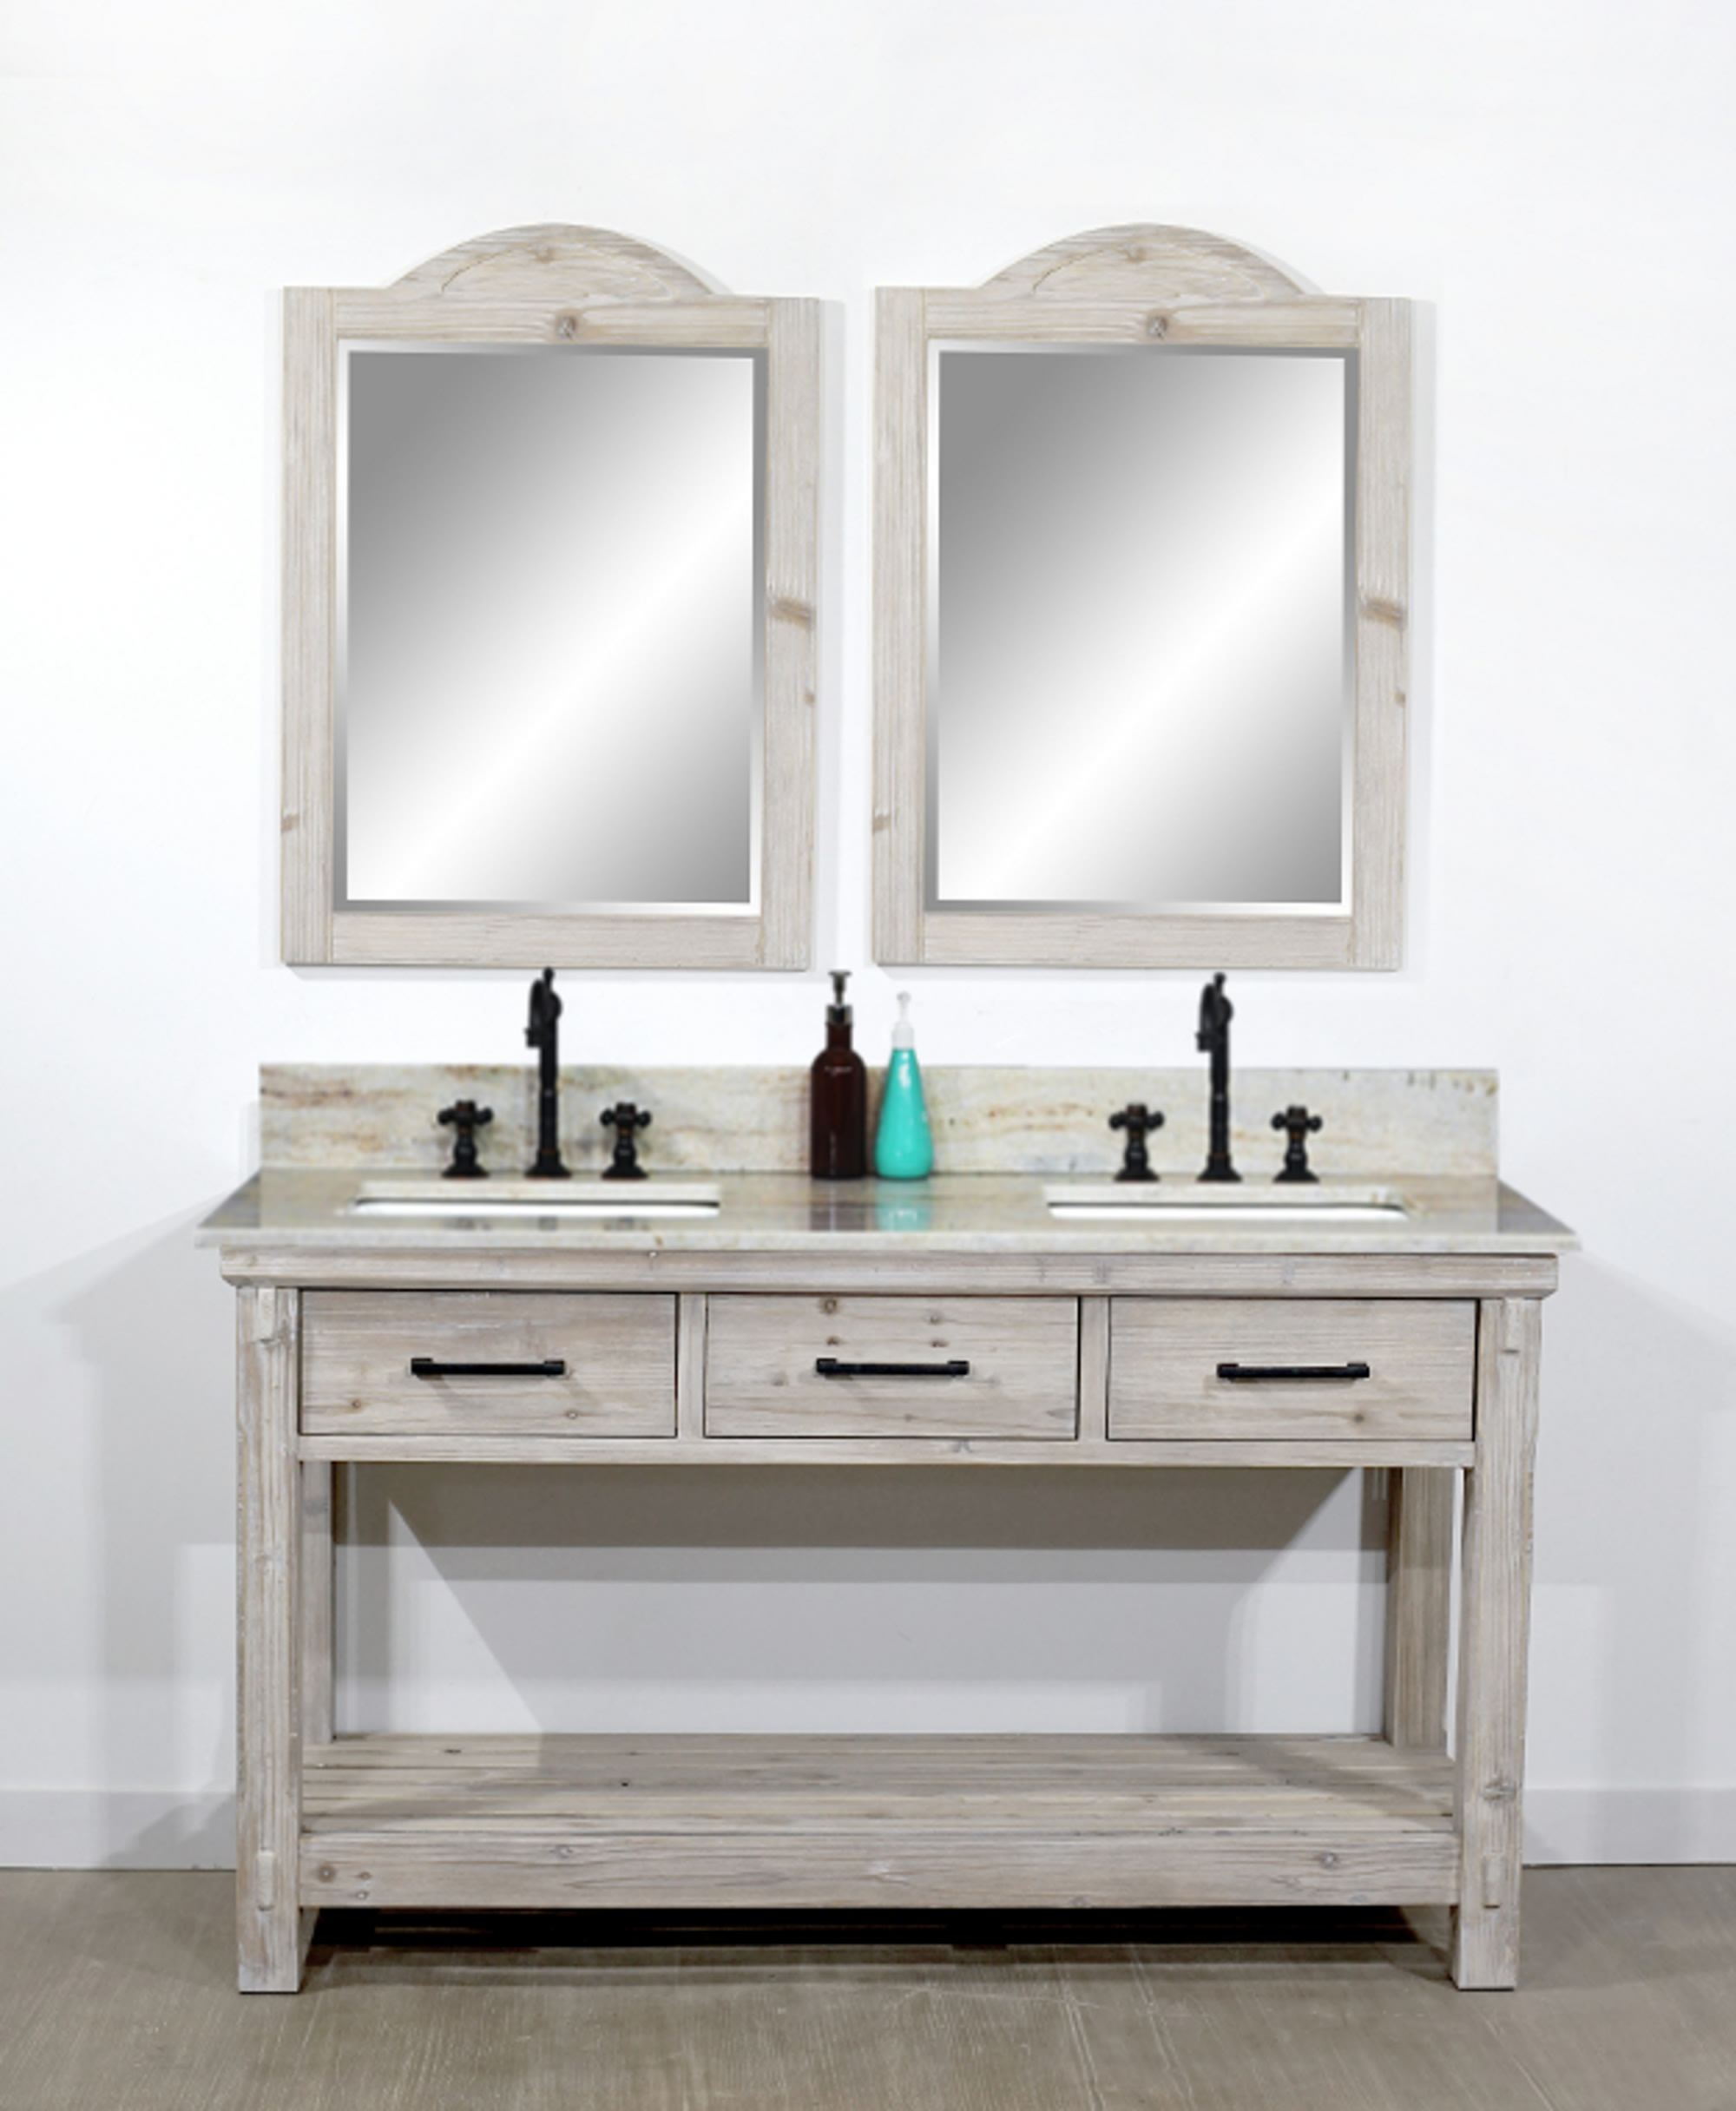 60" Rustic Solid Fir Double Sink Bathroom Vanity - No Faucet with Countertop Options